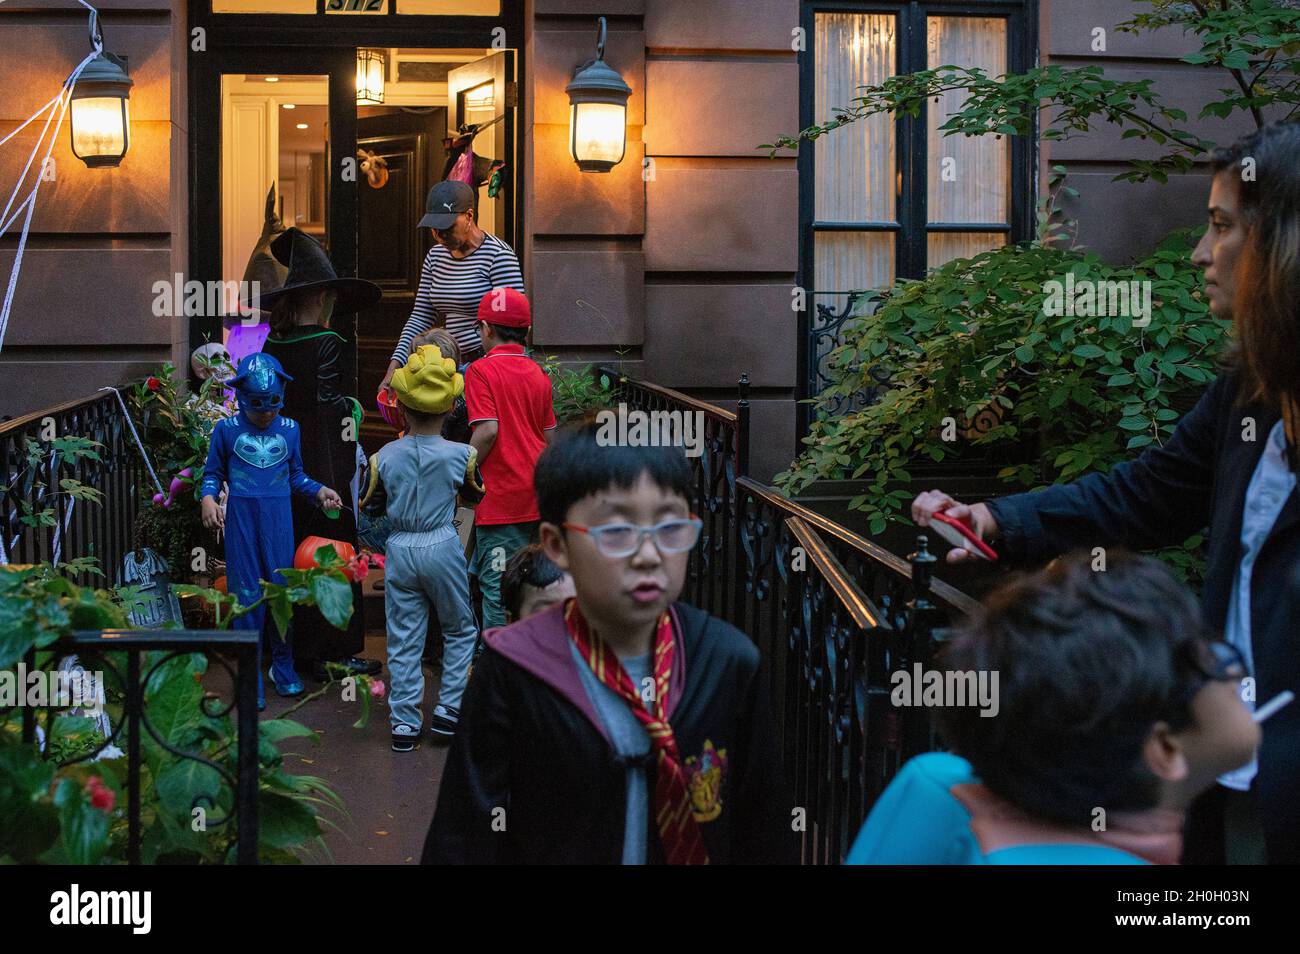 A woman giving out candy to Trick or Treators on Halloween in New York City. Stock Photo